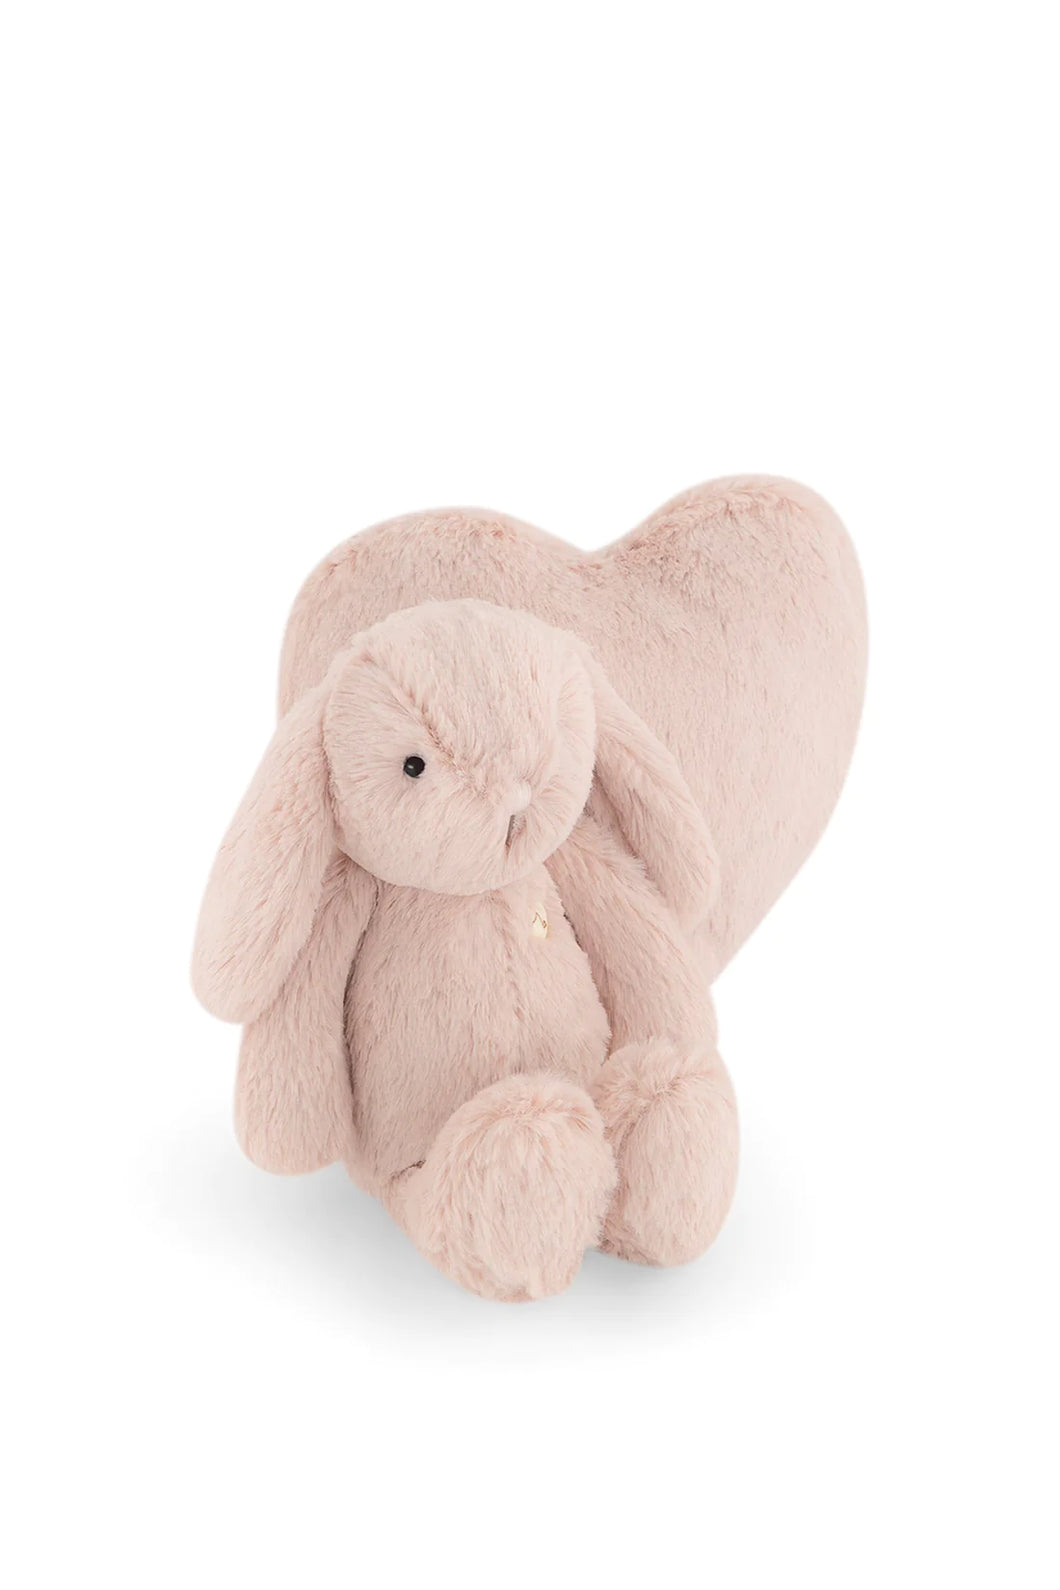 Snuggle Bunnies - Valentines Day - Rose